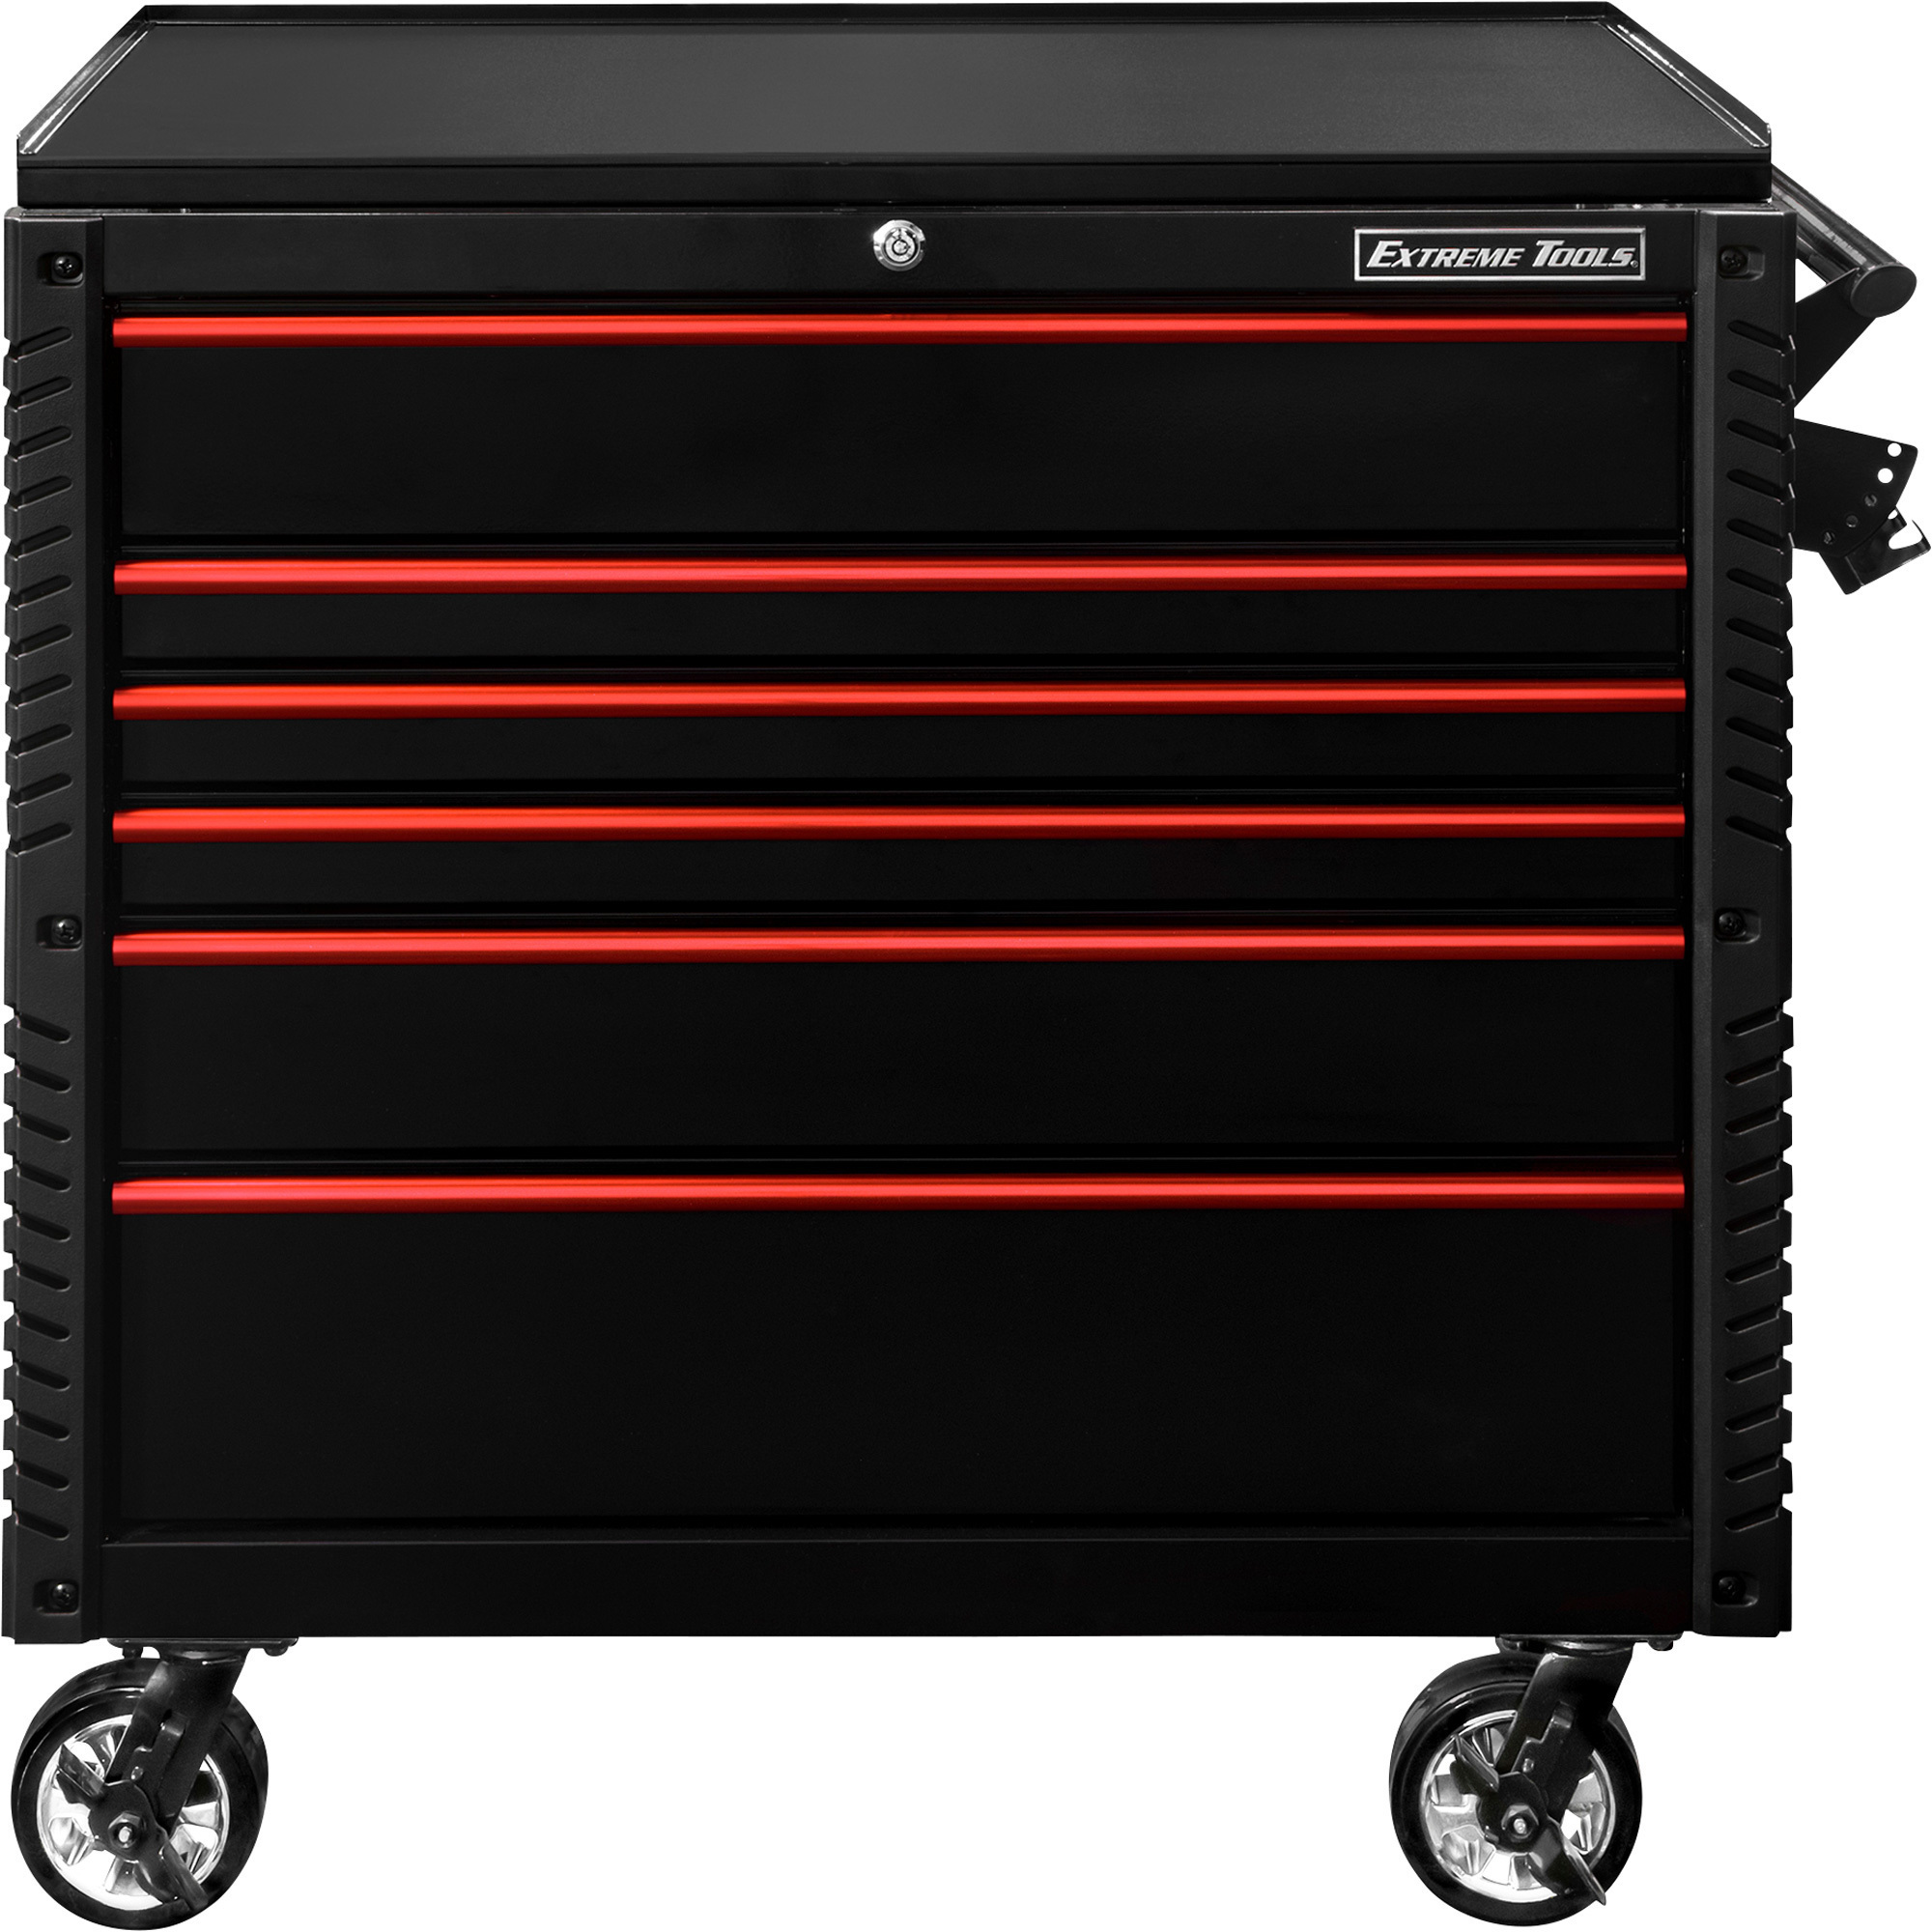 Extreme Tools EX Professional 6-Drawer Tool Cart â 41.75Inch W x 25.75Inch D x 43Inch H, Black/Red, Model EX4106TCBKRD